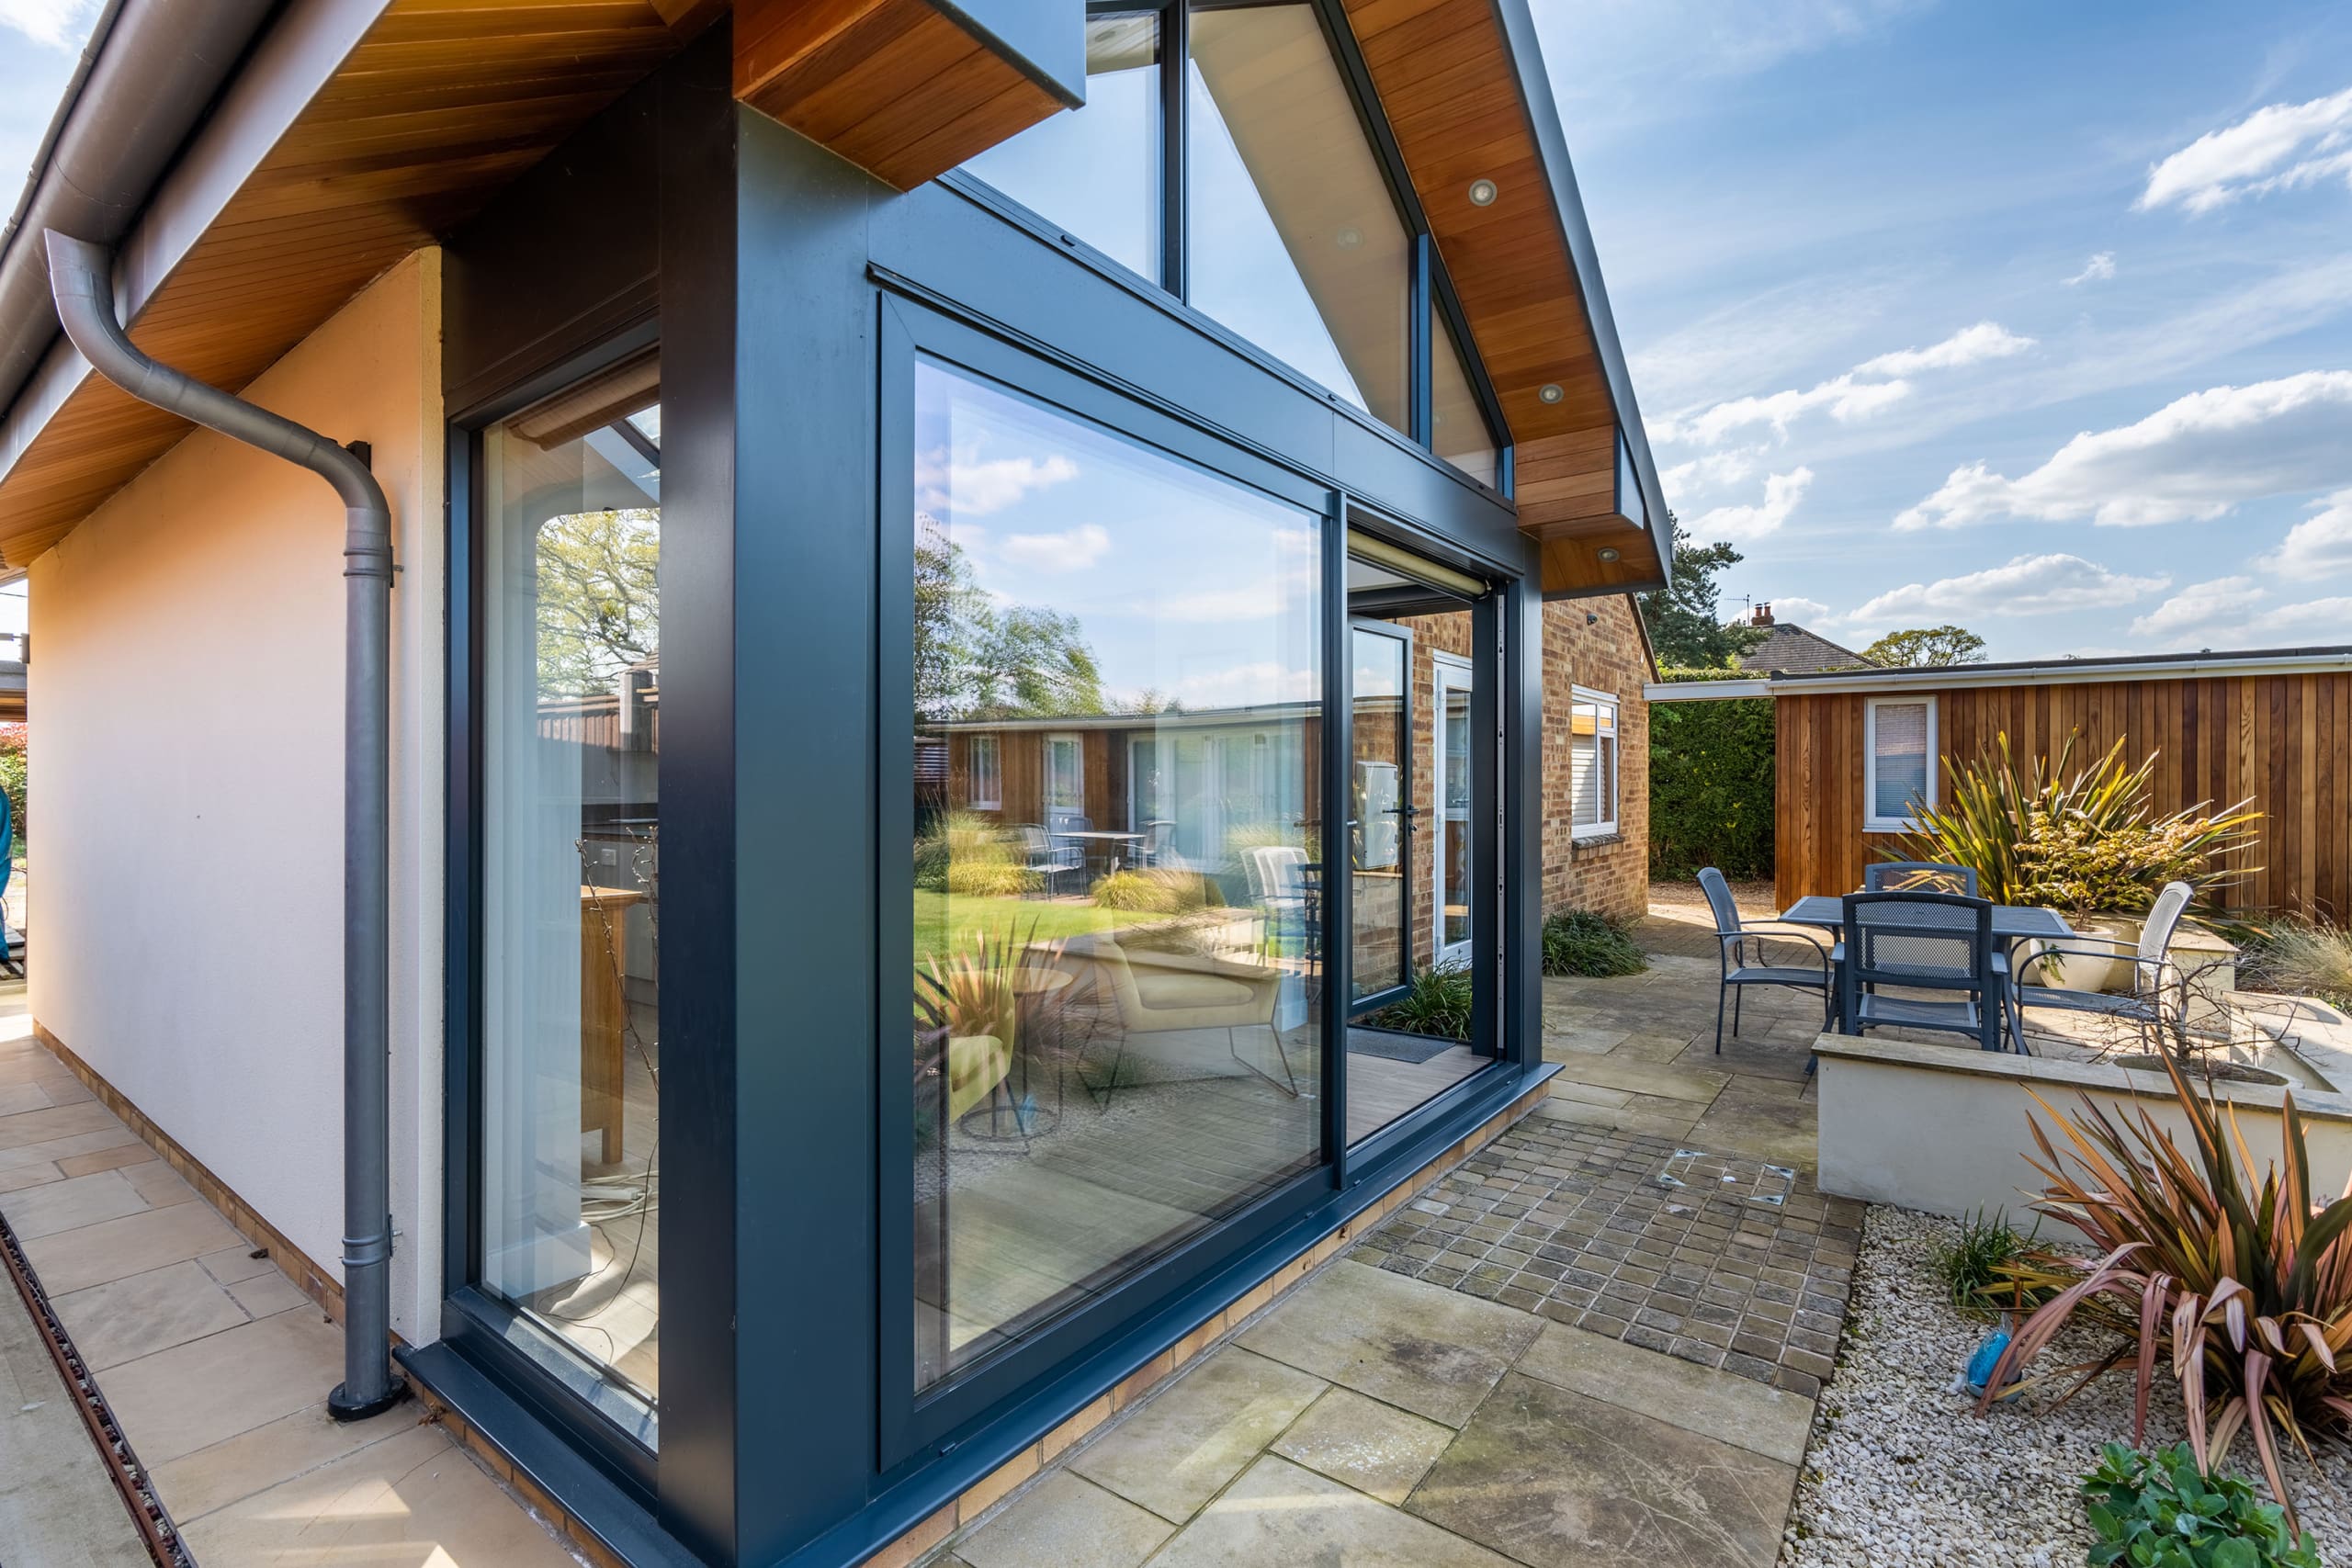 Zinc orangery extension with zinc roof and roof lantern and sliding doors to garden.